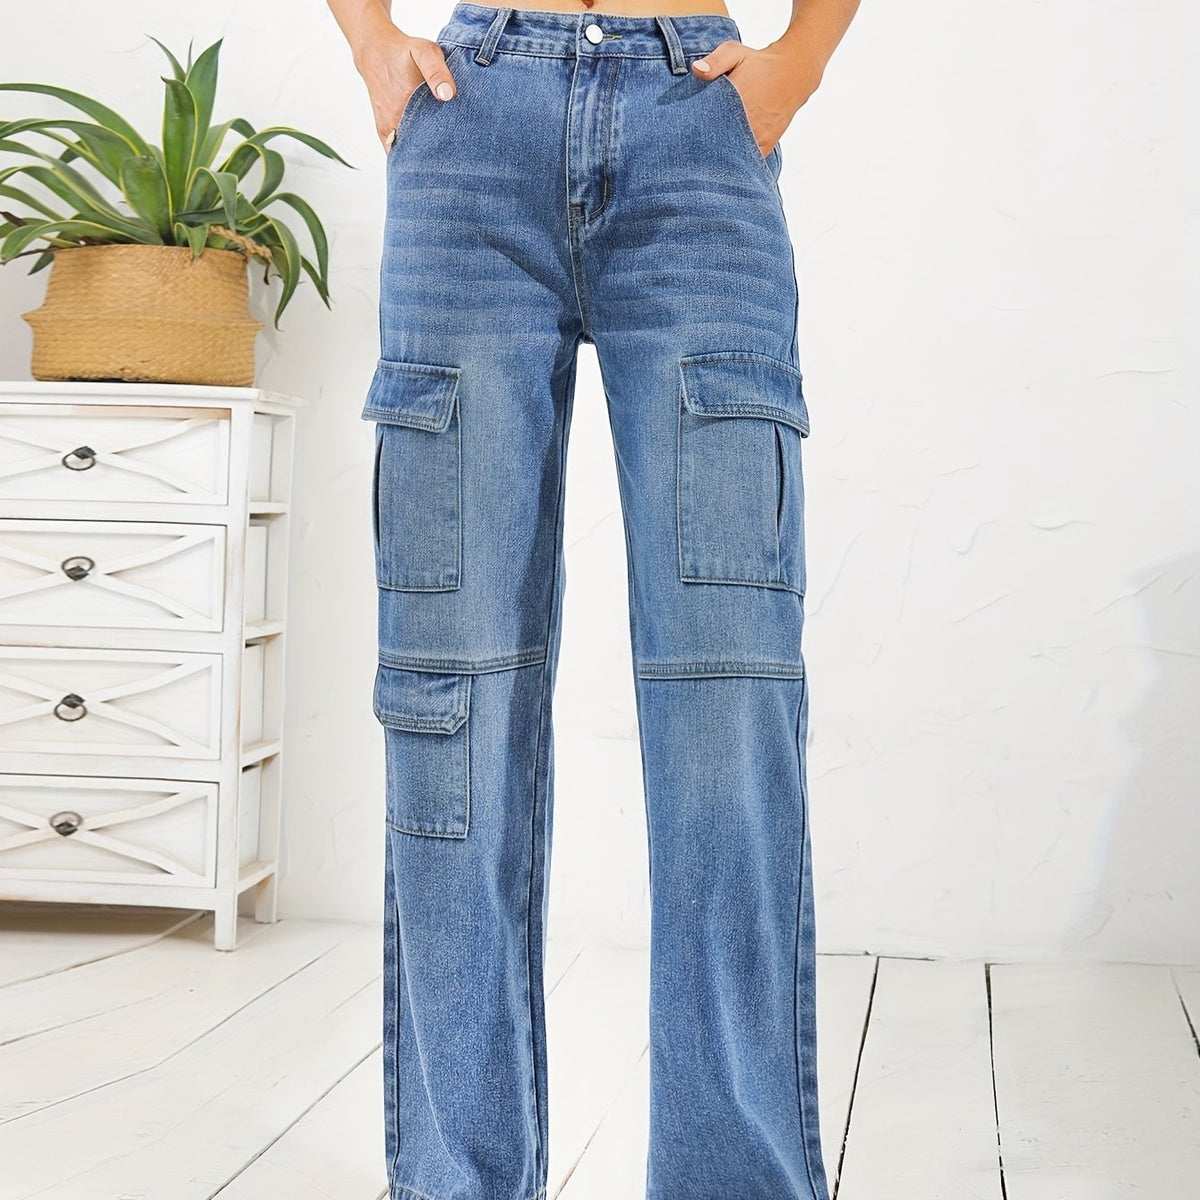 「binfenxie」Flap Cargo Pocket Whiskering Denim Pants, Water Ripple Embossed Crotch Loose Straight Leg Jeans, Causal Pants For Every Day, Women's Denim Jeans & Clothing